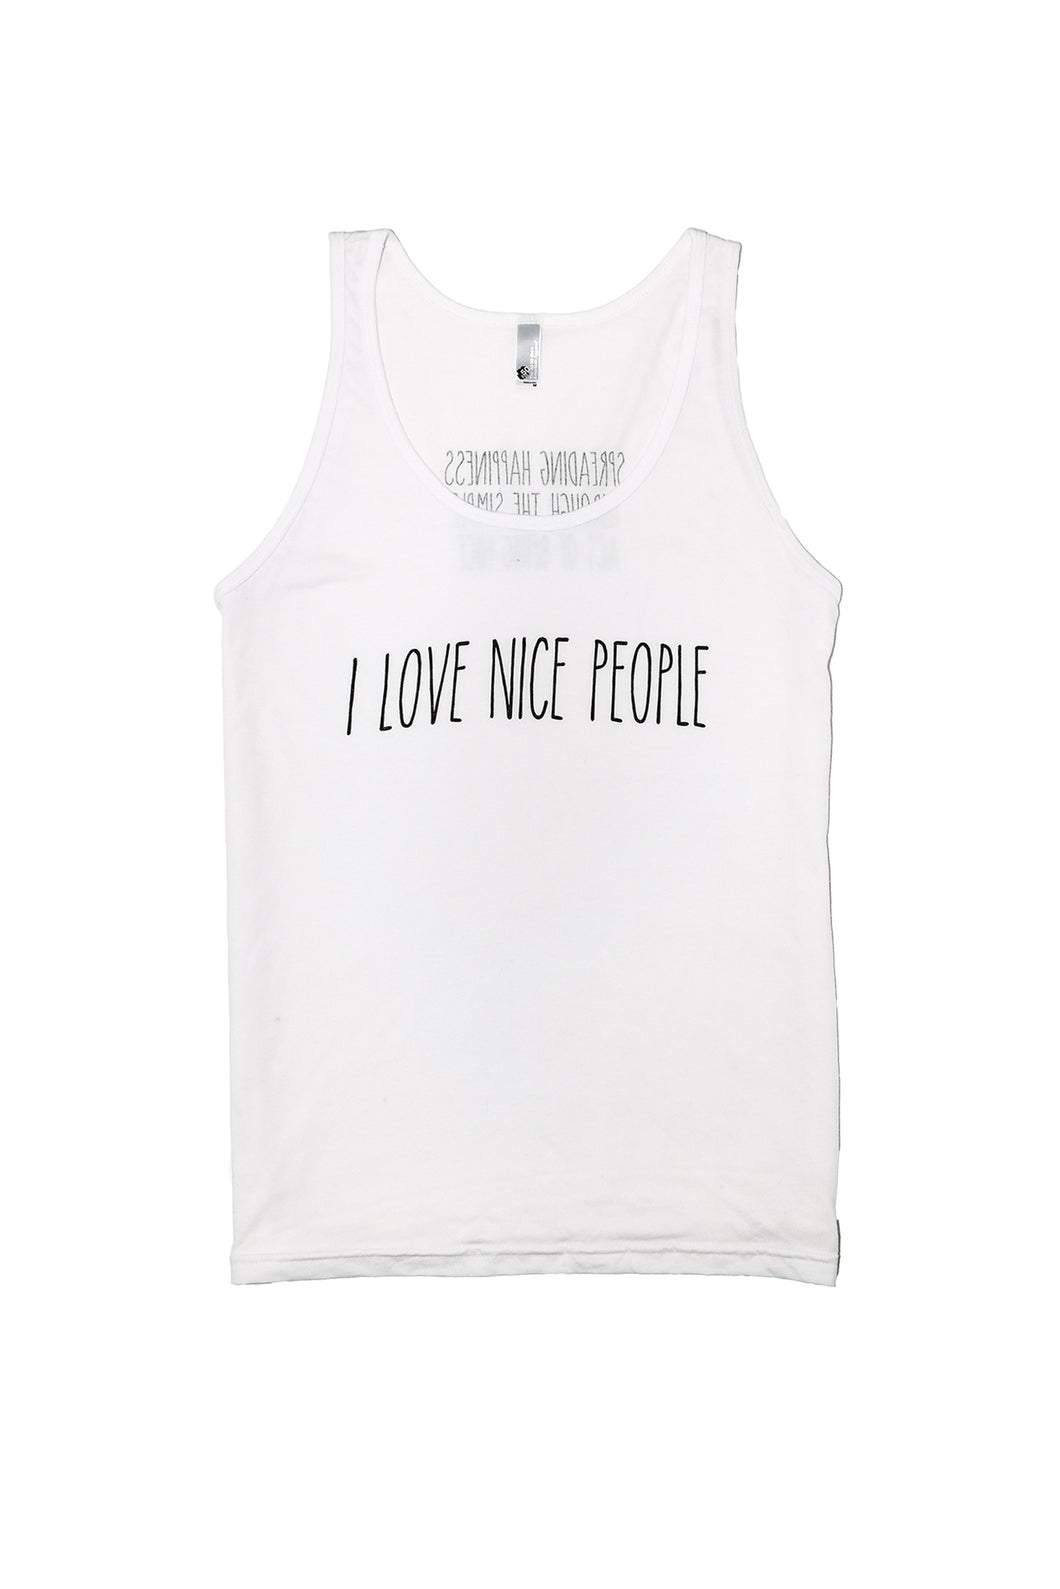 Black and white everyday tank from I Love Nice People!